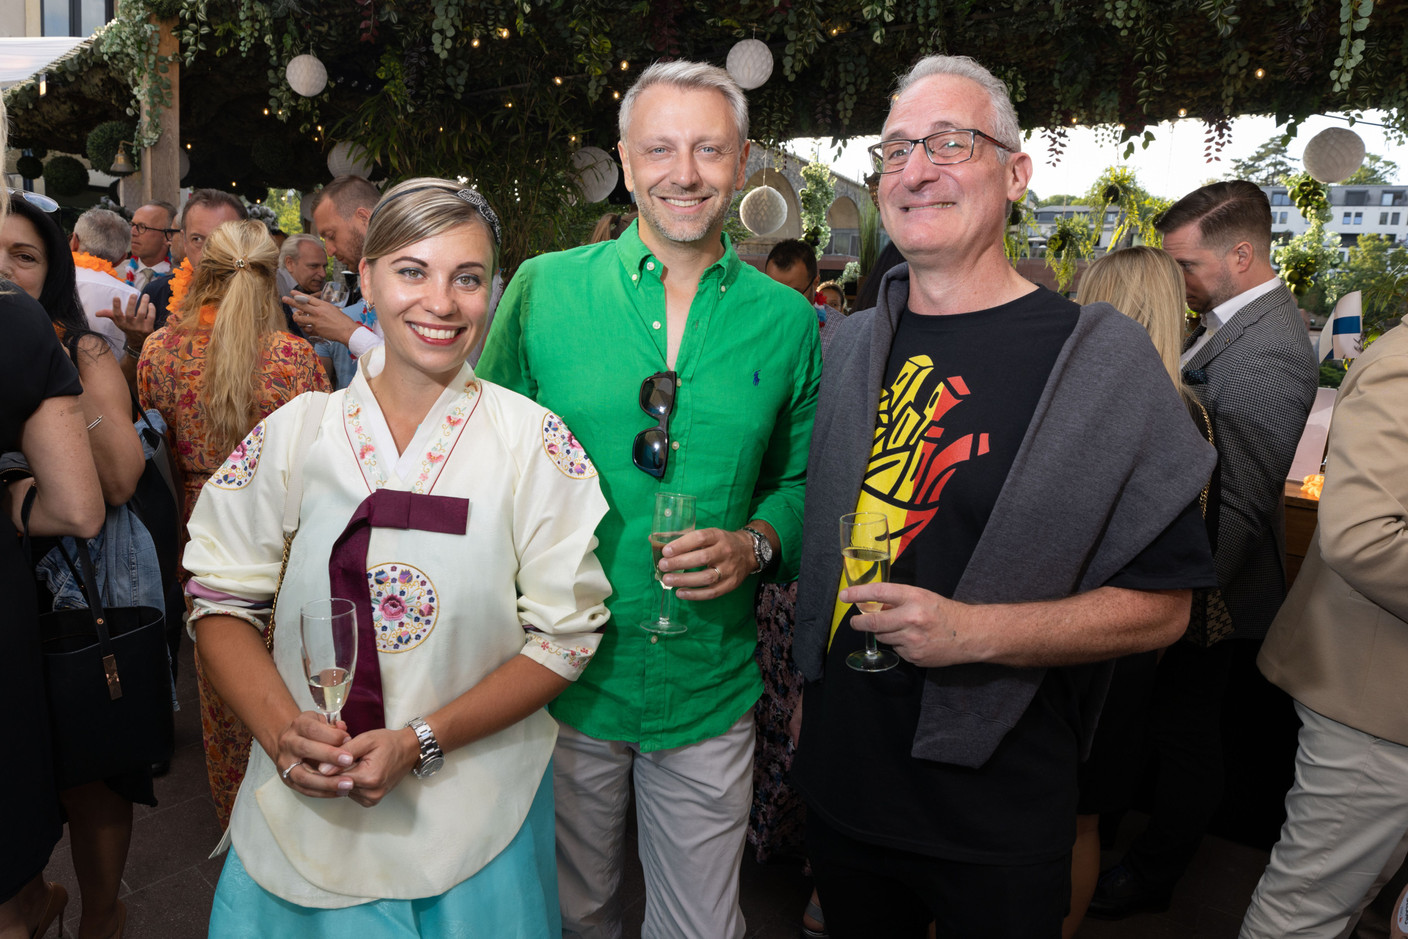 Valeria Leone (East-West United Bank), Igor Leone (European Investment Bank) and Aaron Grunwald (Delano) seen during the Delano summer party, 13 July 2023. Photo: Guy Wolff/Maison Moderne